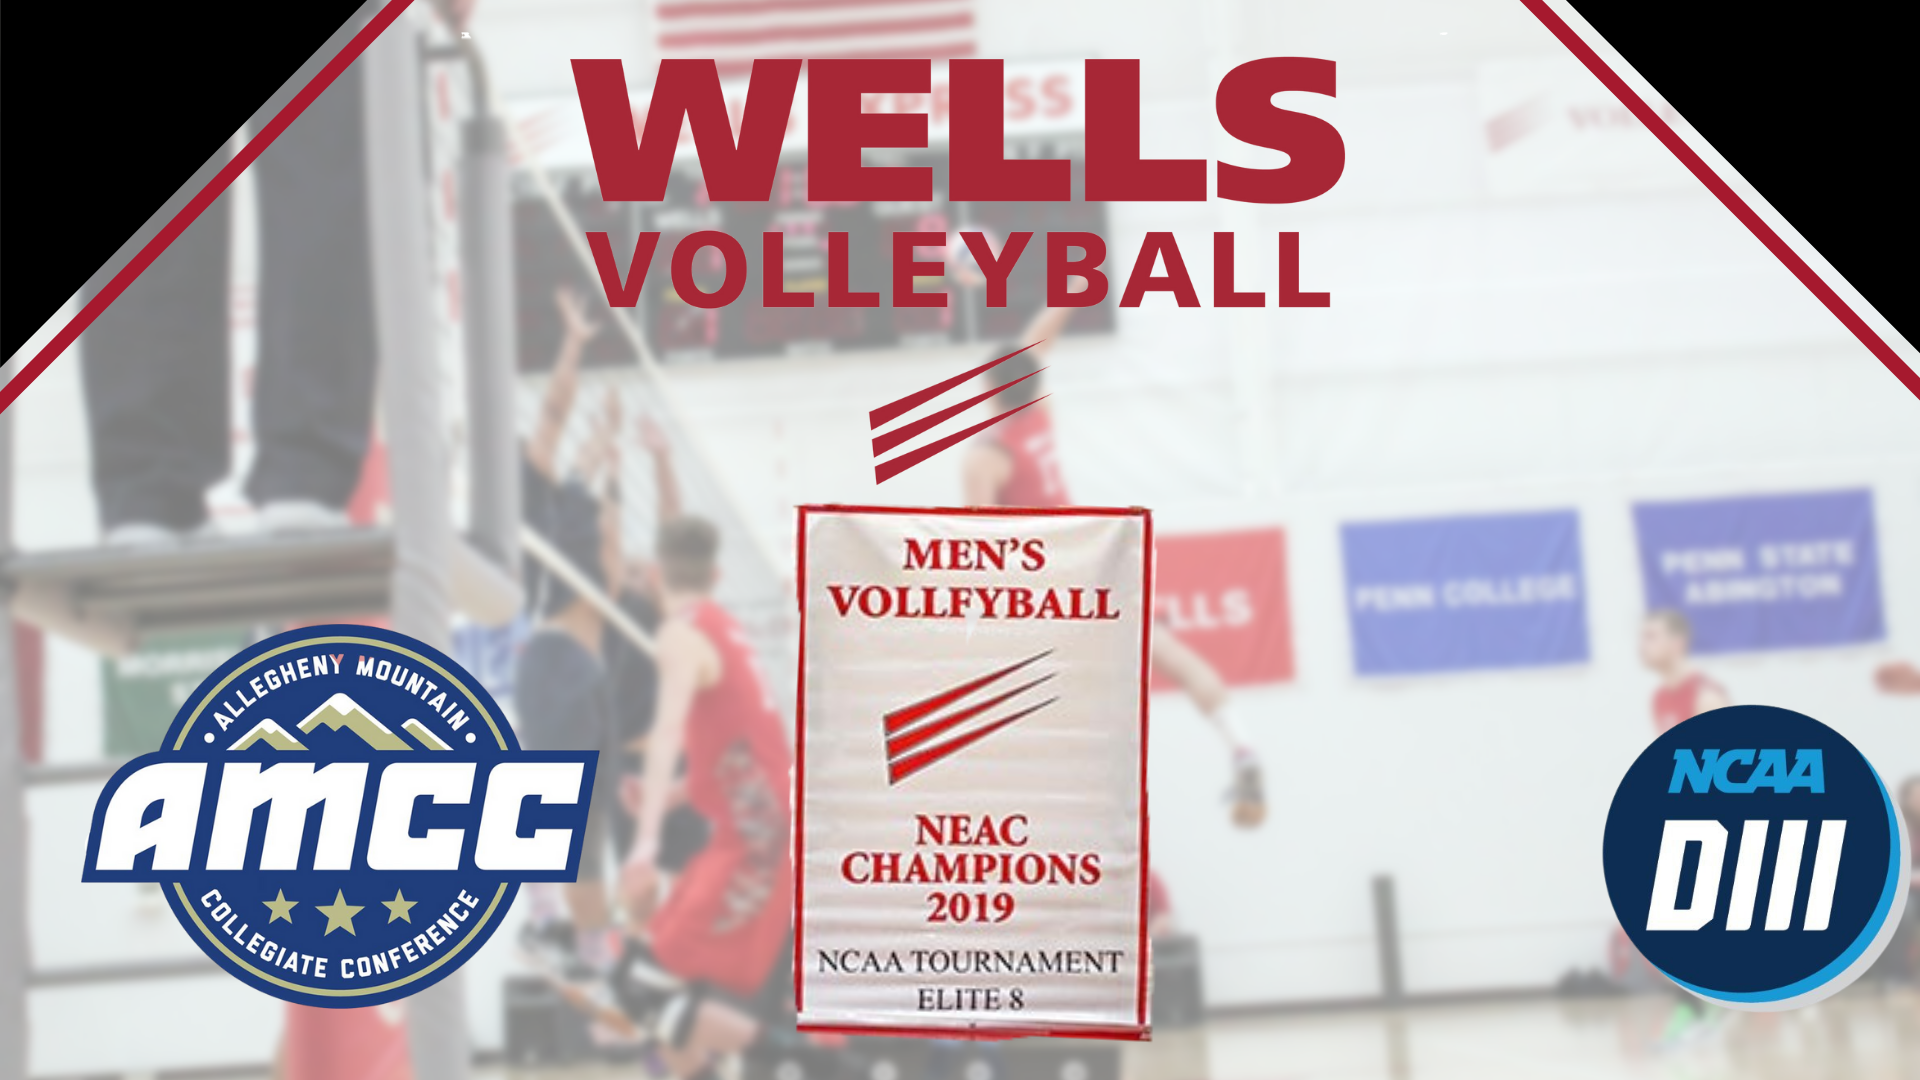 Men's Volleyball Season Kicks Off With New Affiliation